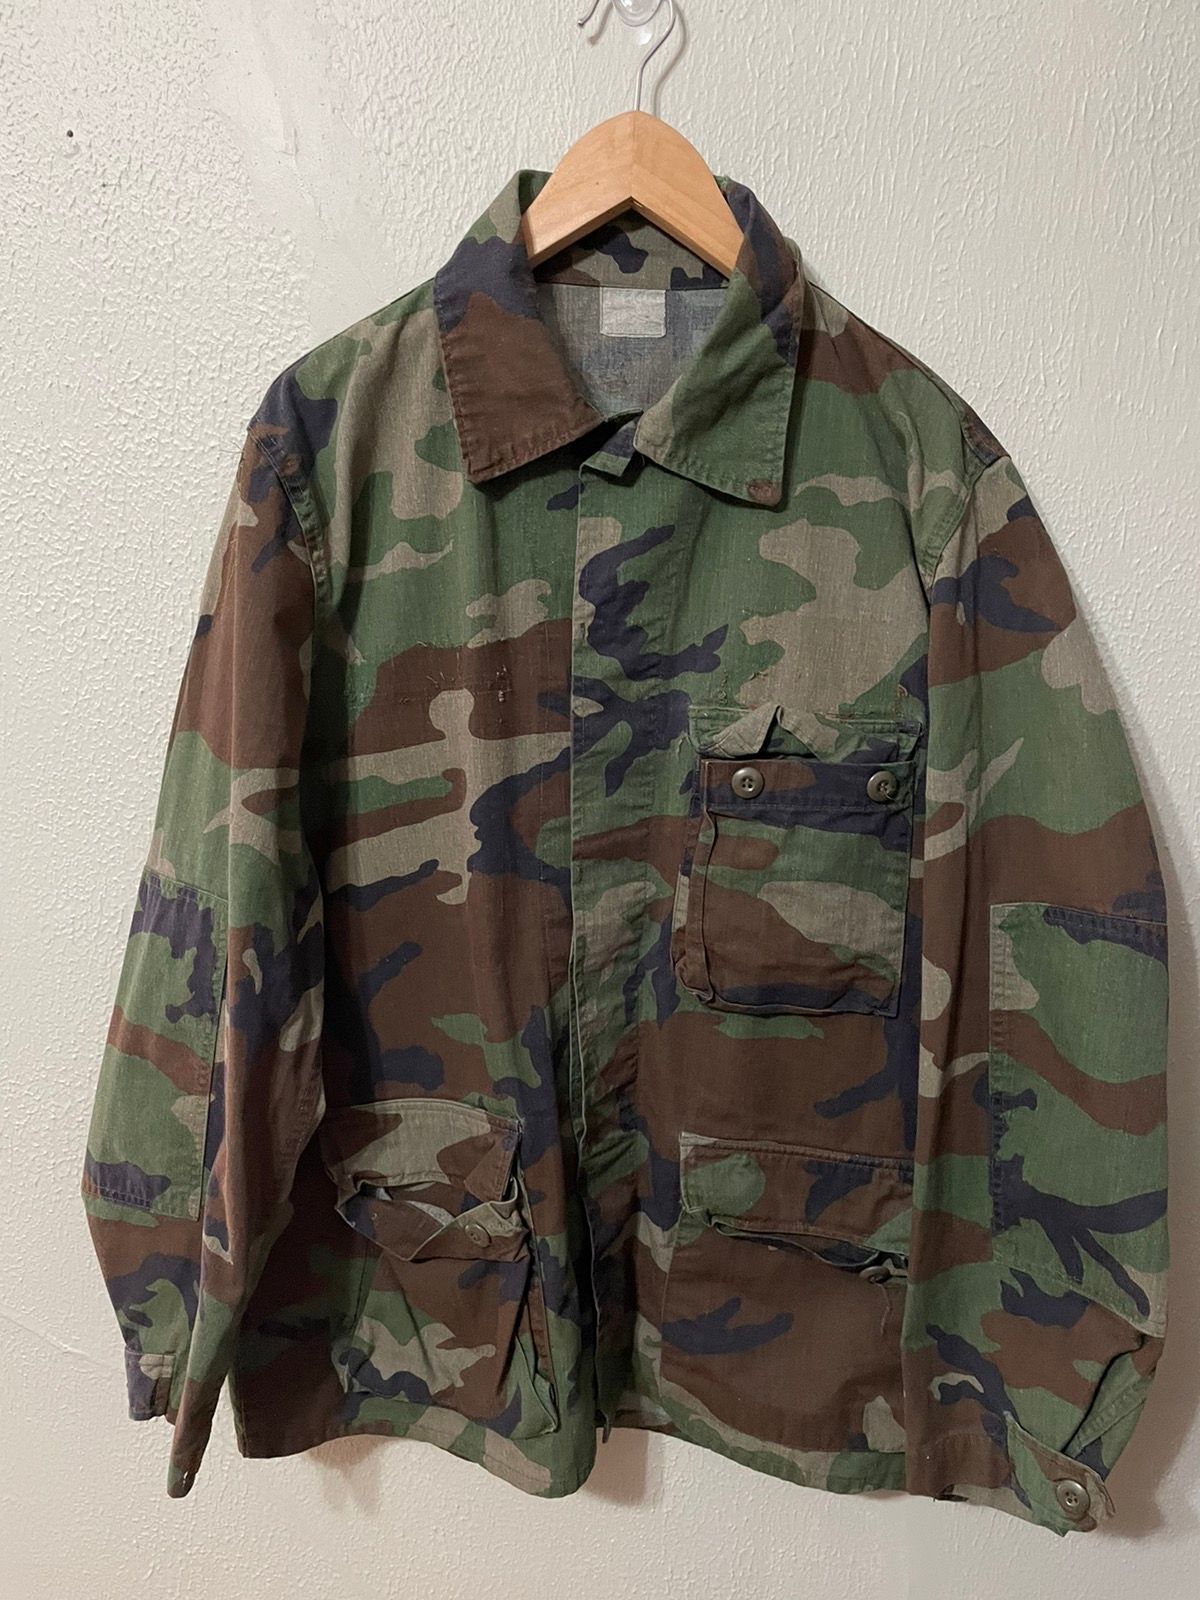 Vintage Vintage Woodland 1980s Army Modified Fatigue Shirt | Grailed